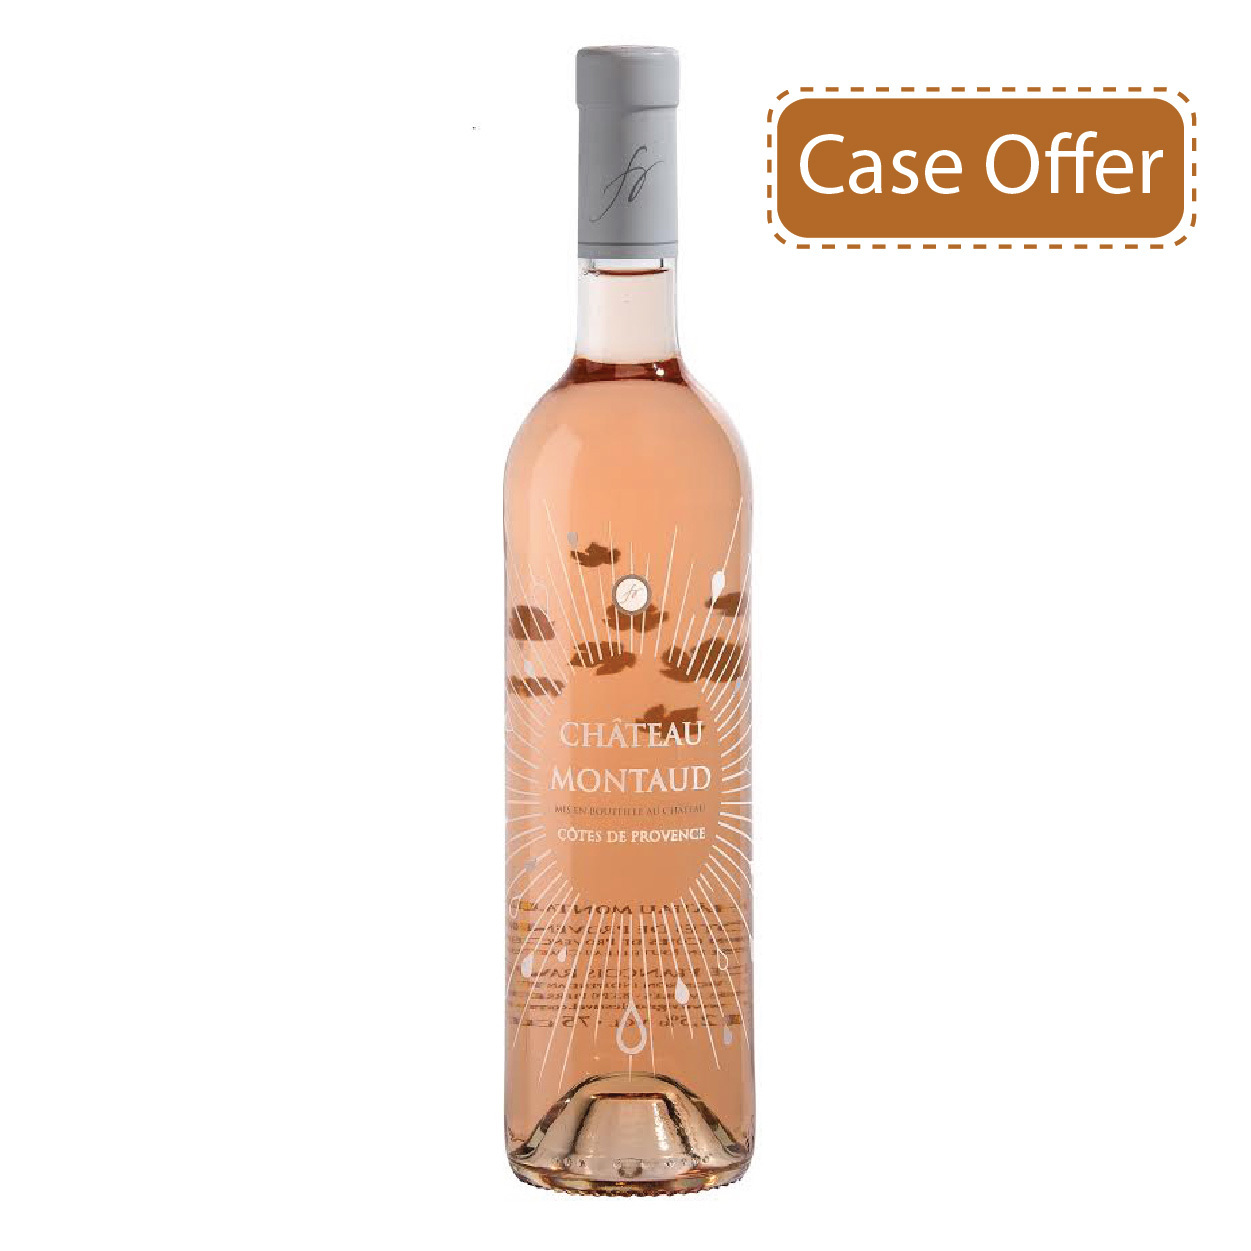 Rose Wine - Chateau Montaud Bouteille Bordelaise Rose, 2017 Case Offer - France*